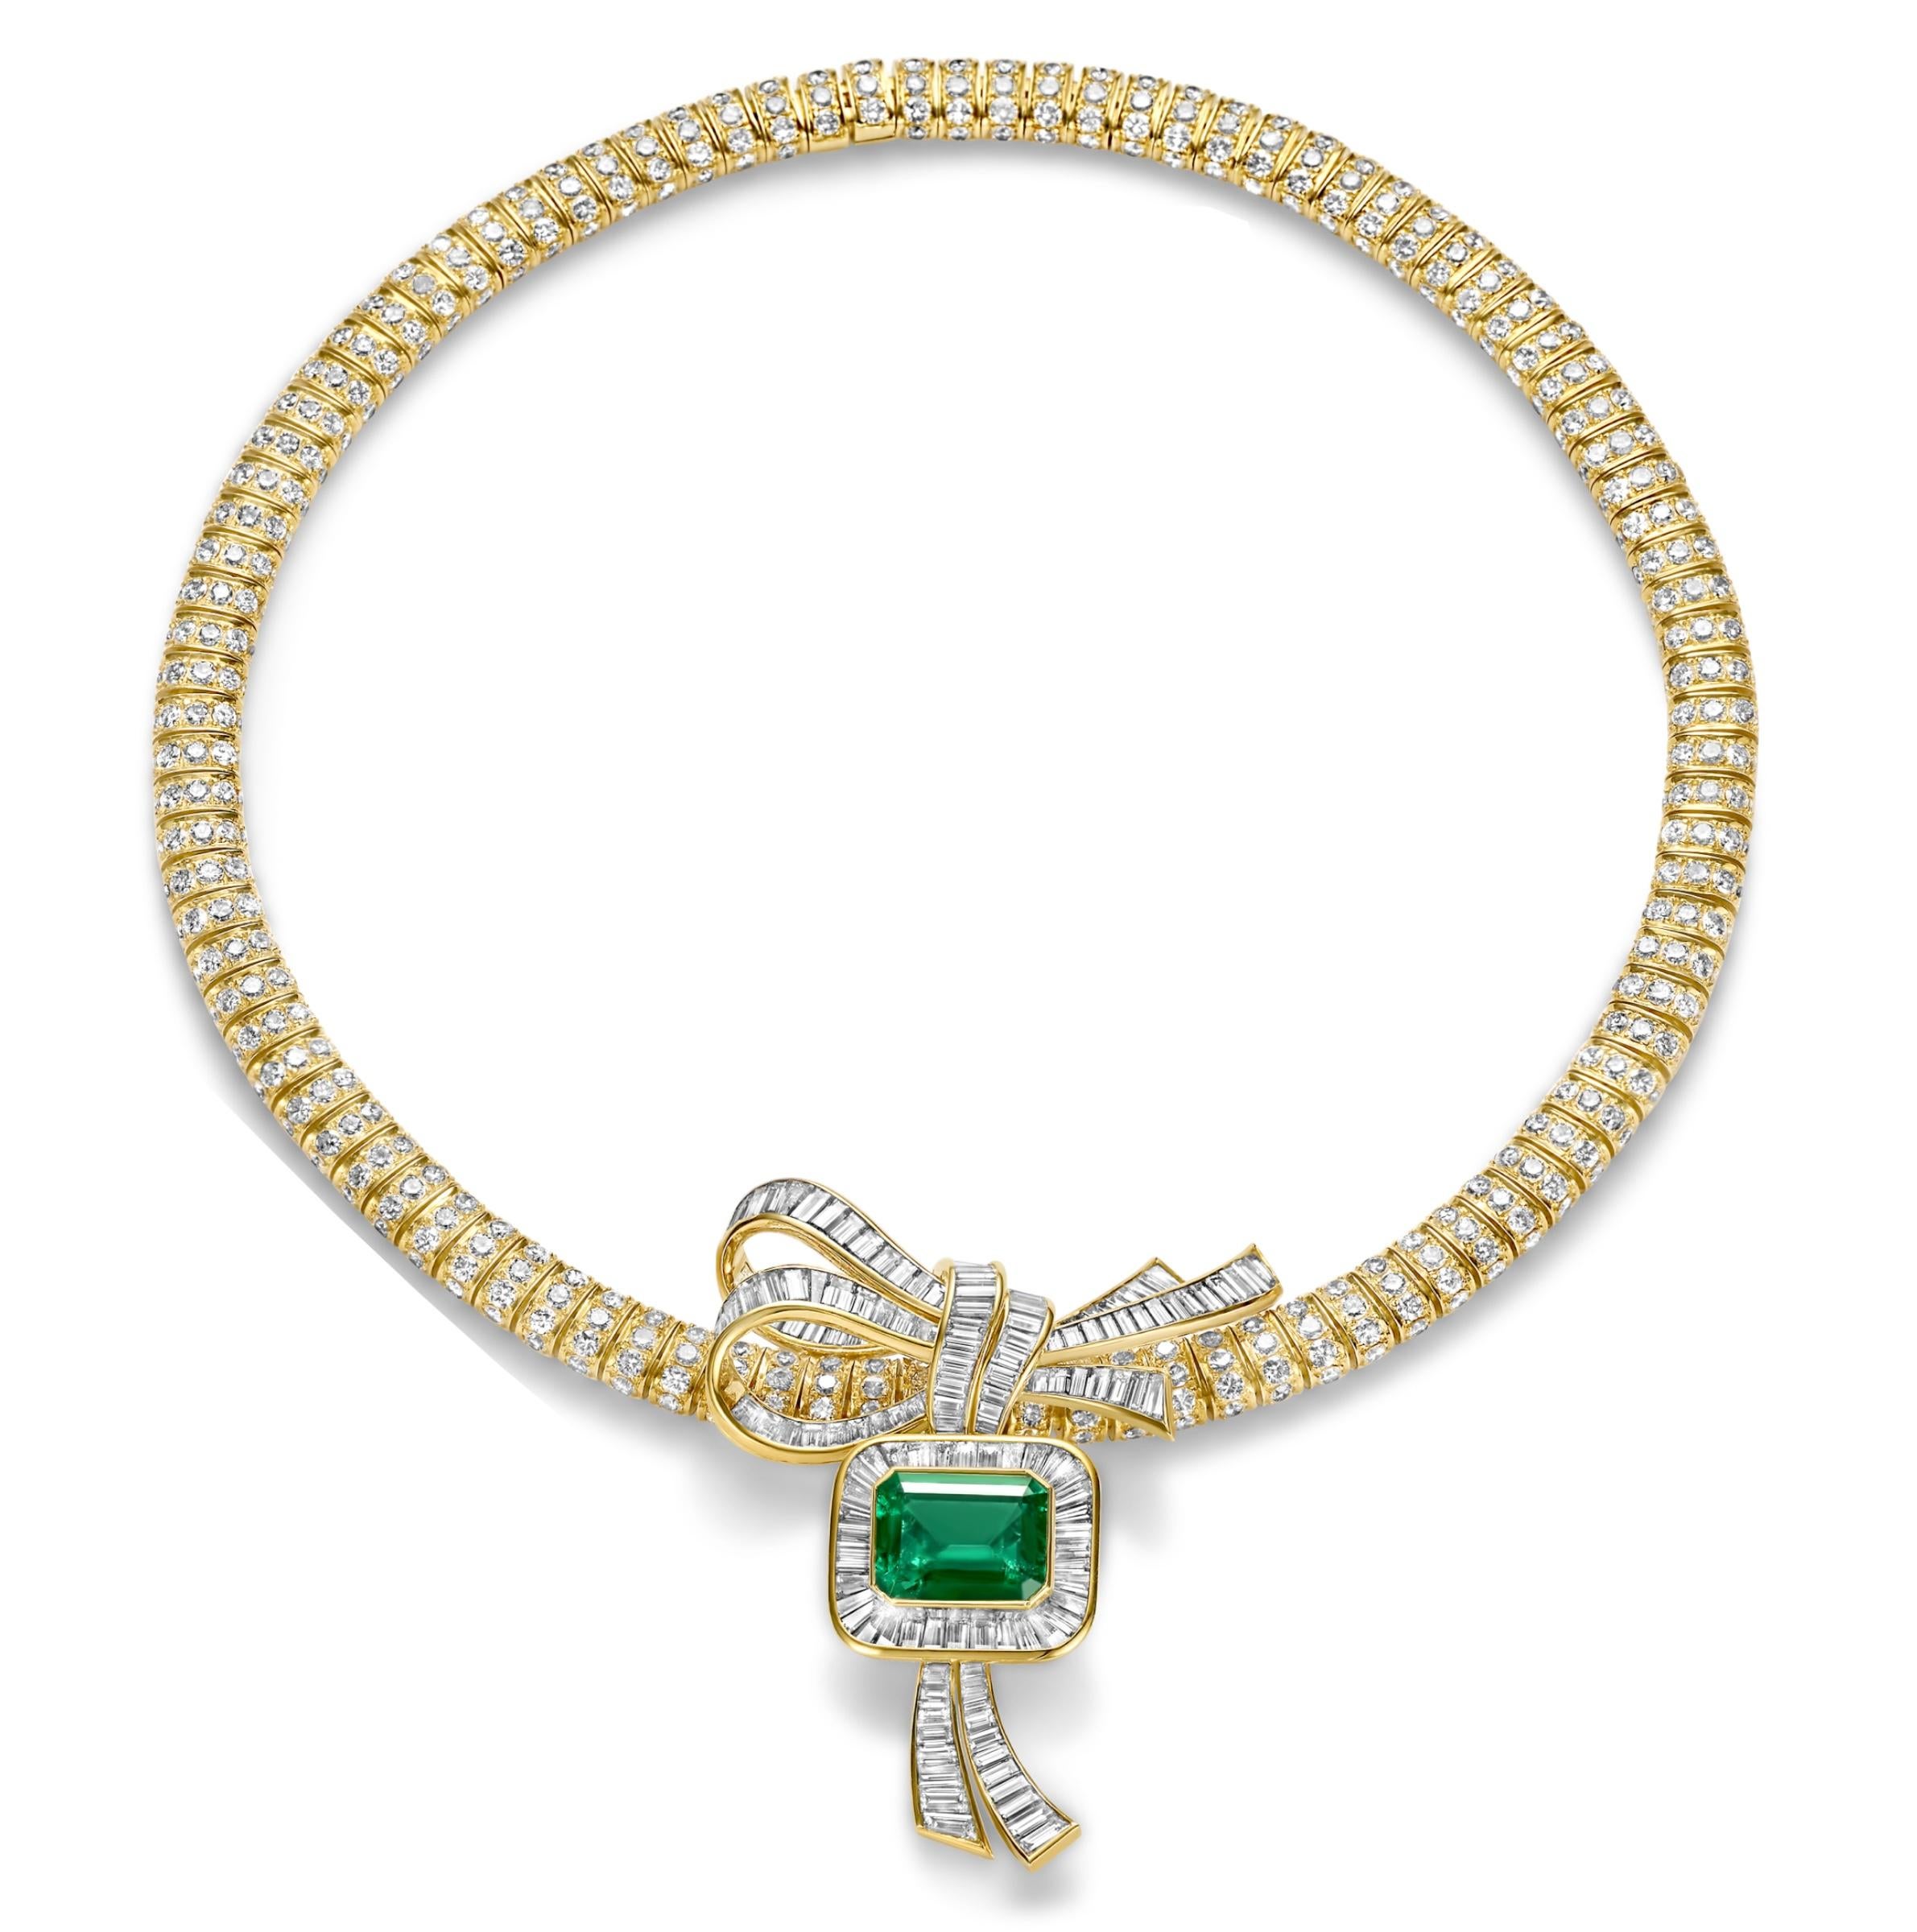 Magnificent 18 kt. Yellow Gold Adler Genève Set Necklace & Earrings With Emerald and Diamonds from Estate Sultan Of Oman Qaboos Bin Said.

Completely Hand made by Adler Genève, one of a kind !

Necklace can also be separated from pendant to be worn